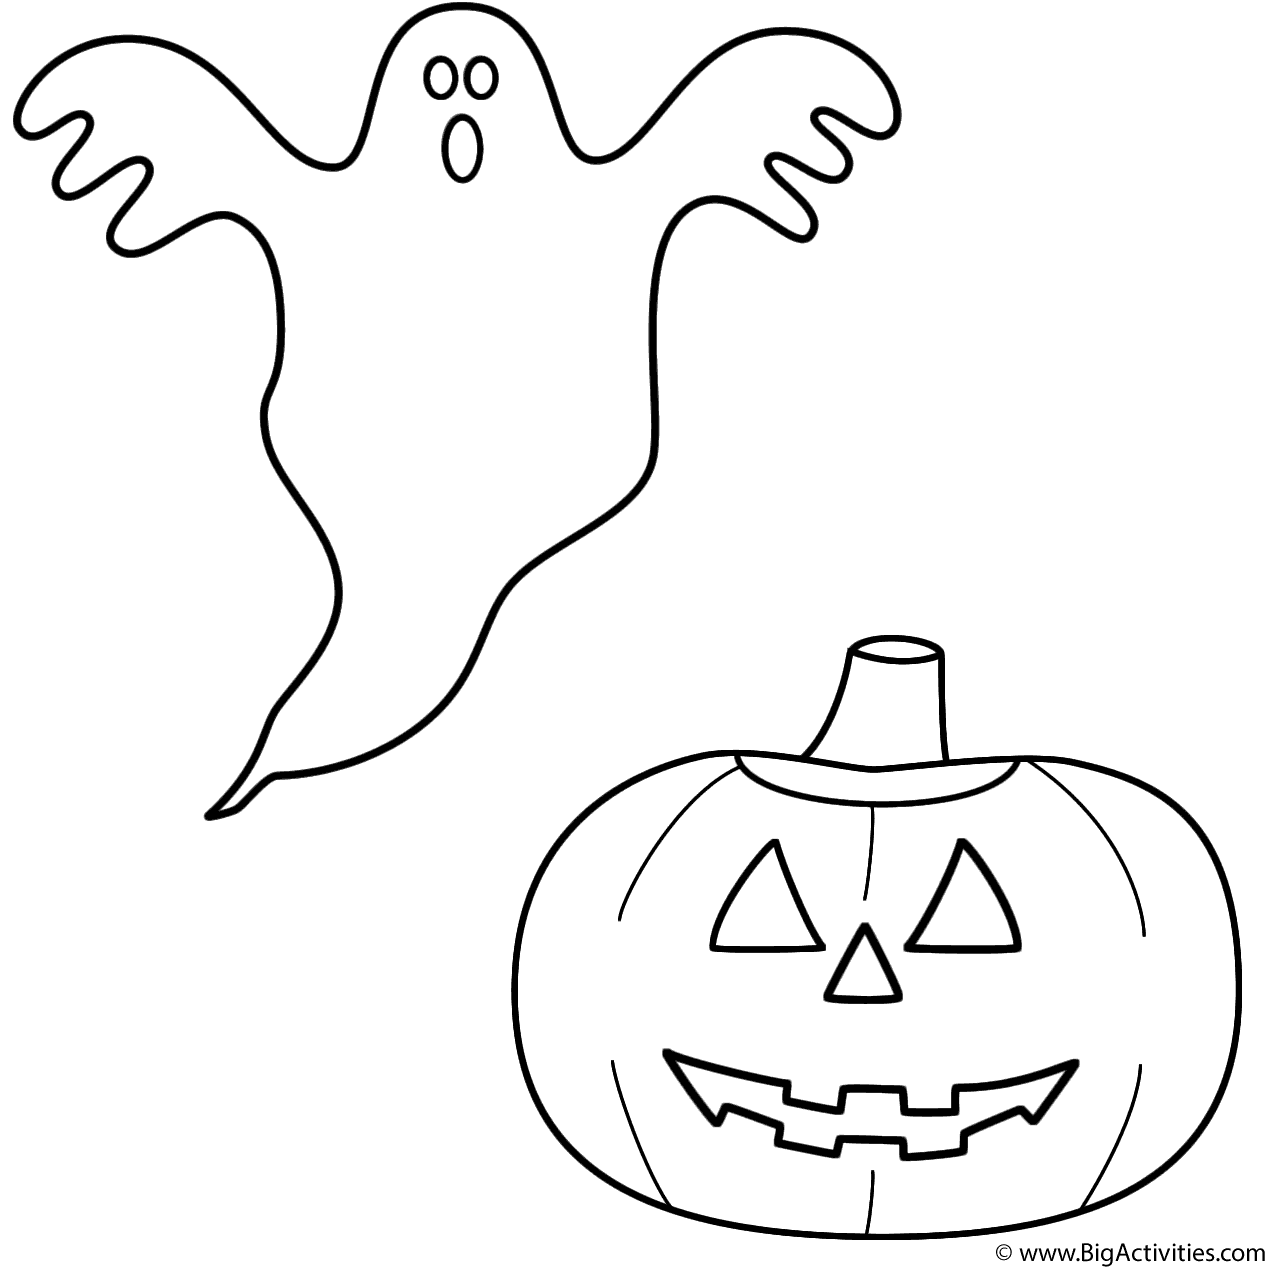 Ghost with pumpkin/jack-o-lantern - Coloring Page (Halloween)